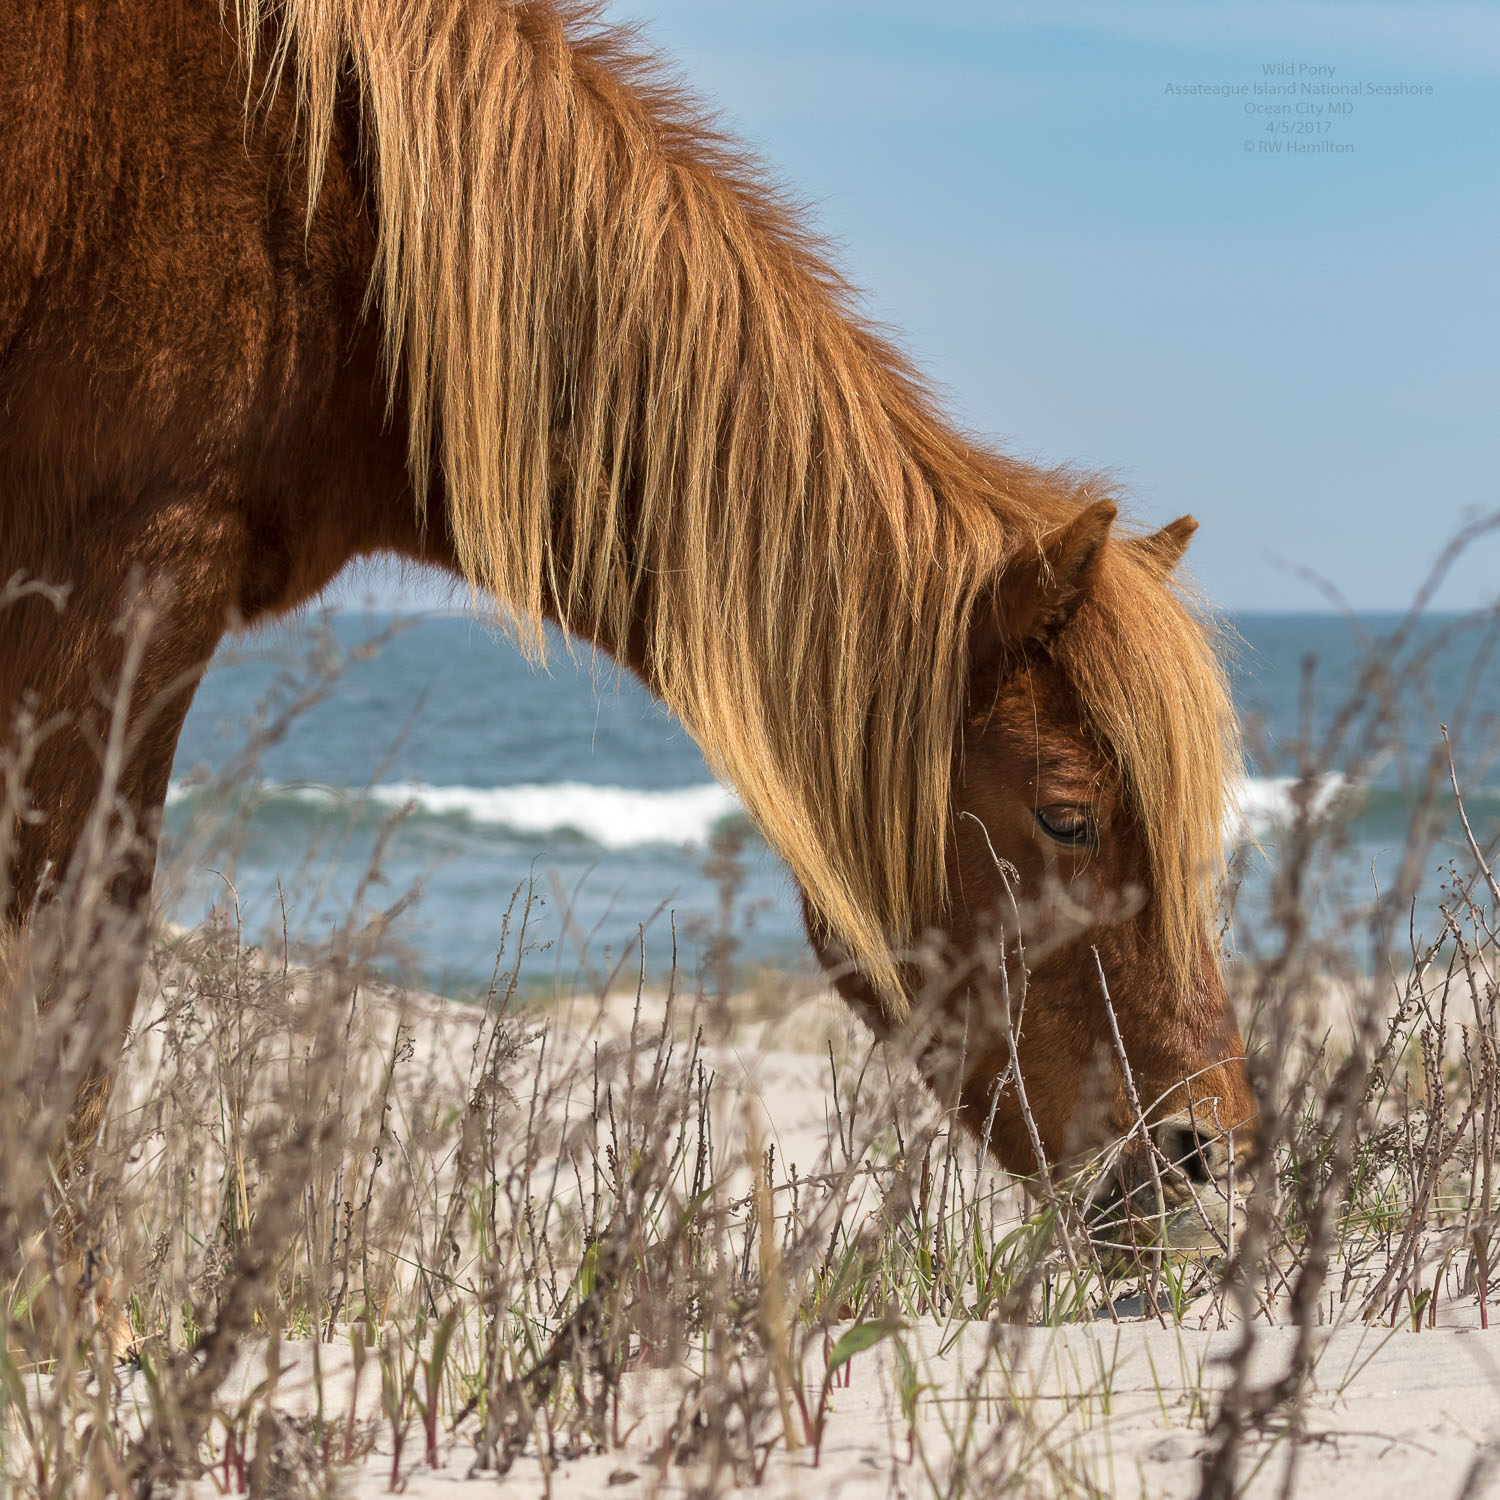 Click photo to see more Assateague Island horses